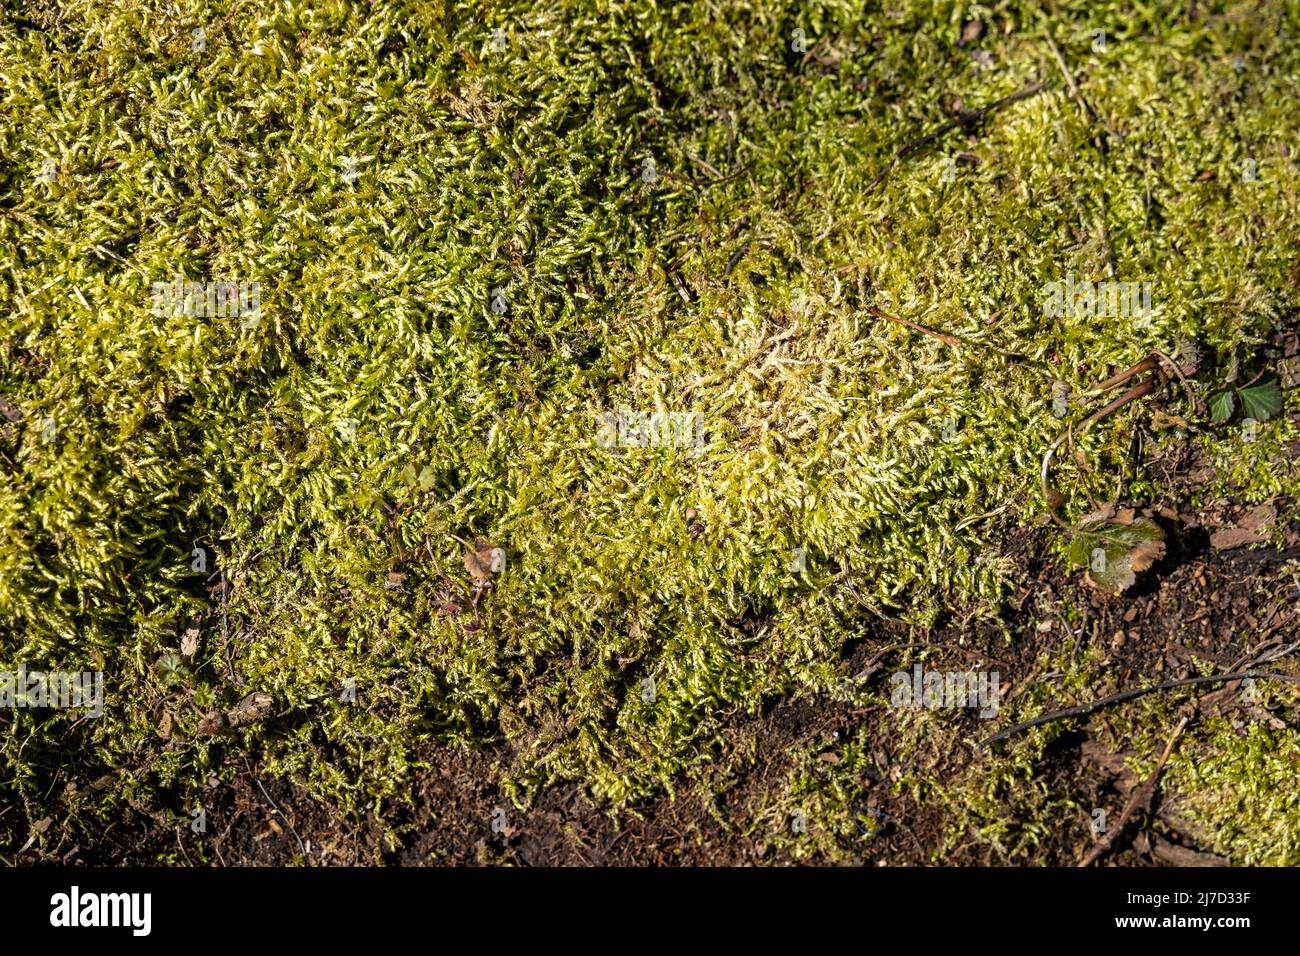 Texture of green moss. Abstract background of outdoor plants in the nature. Woodland environment with plants that are growing in humid areas. Stock Photo